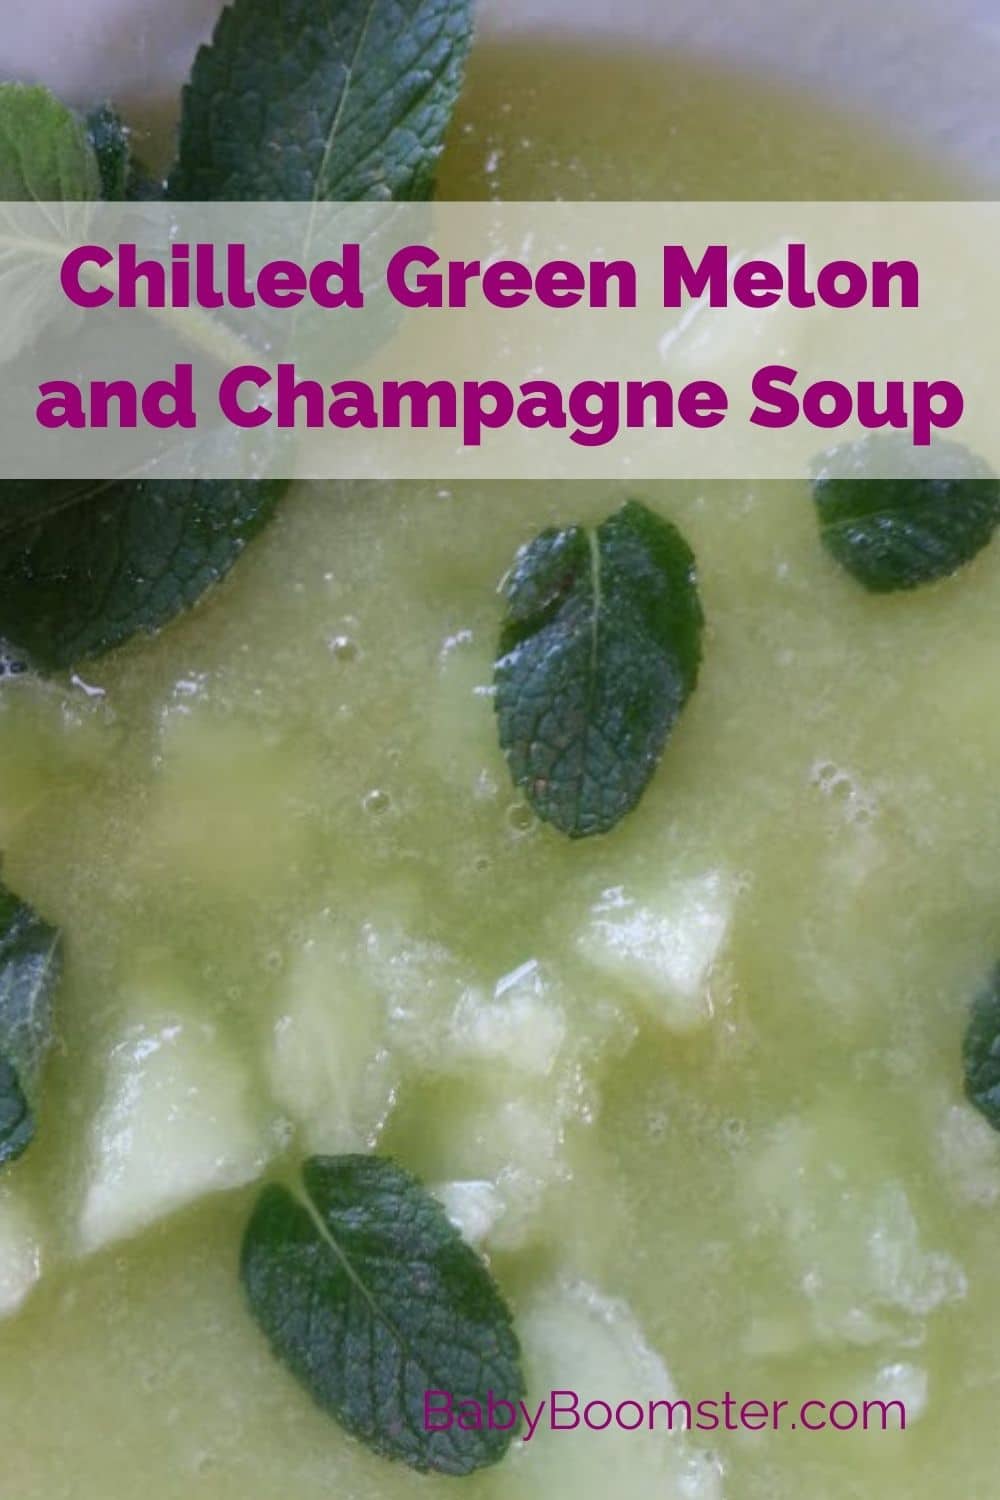 Chilled Green Melon and Champagne Soup